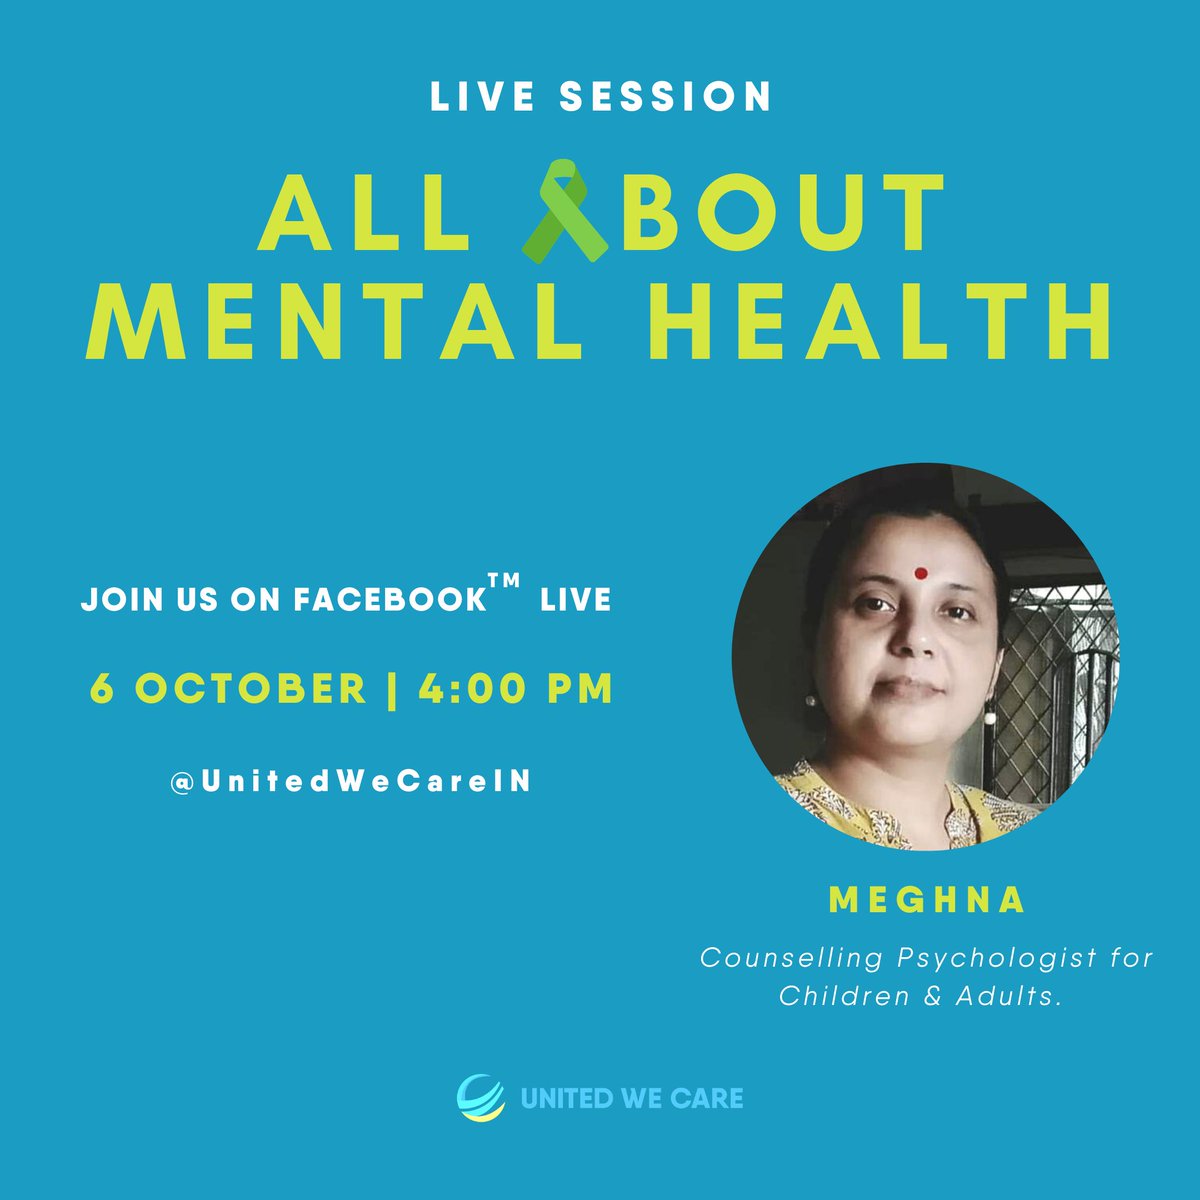 This week is World Mental Health Awareness Week. @unitedwecare_in brings a live session with psychologist Meghna on #MentalHealth on 6th OCTOBER, 4 PM

Wear a #GreenRibbon and show others you care about Mental health #MentalHealthAwarenessWeek #MentalHealthMatters #Mentalhealth